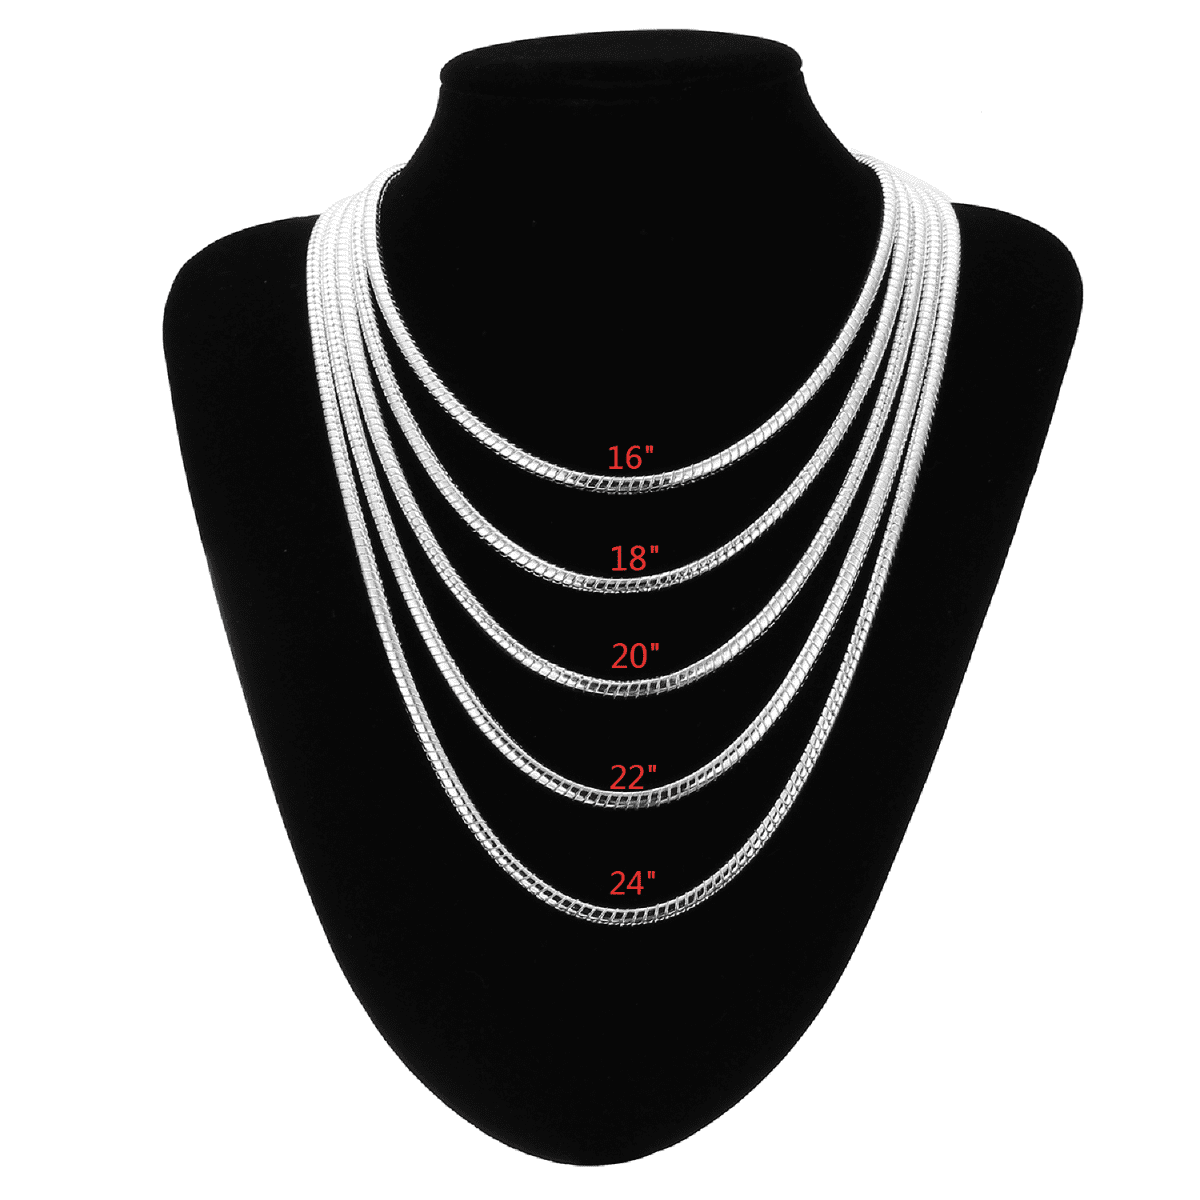 Double Accent 0.7mm Sterling Silver Italian Chain Necklace Round Snake Chain 16, 18, 20, 22, 24, 30 Inch 